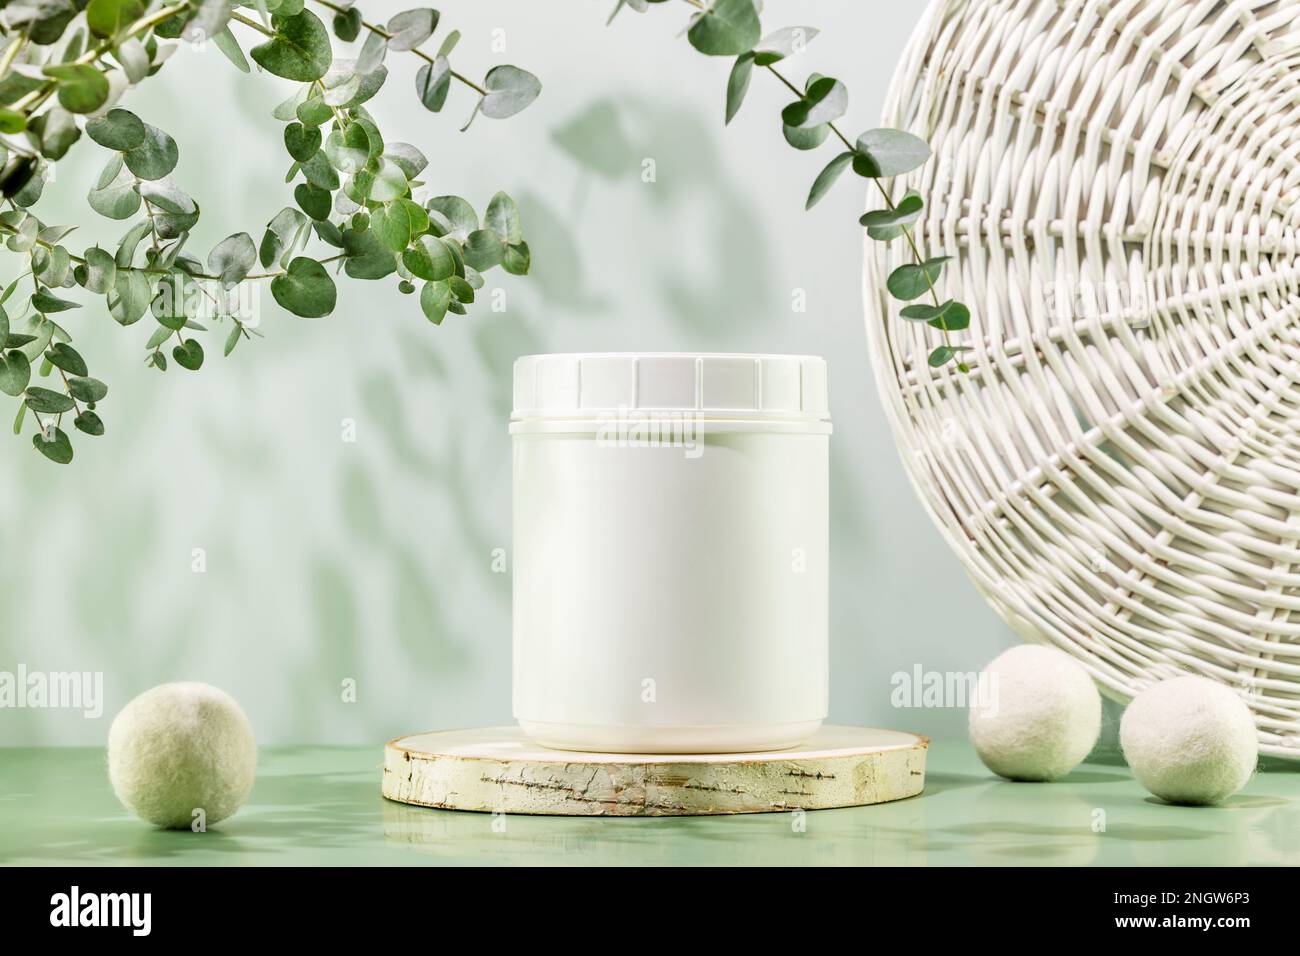 Natural laundry detergent mockup. Eco friendly washing concept with container of washing powder on wooden podium with laundry balls and eucalyptus spr Stock Photo